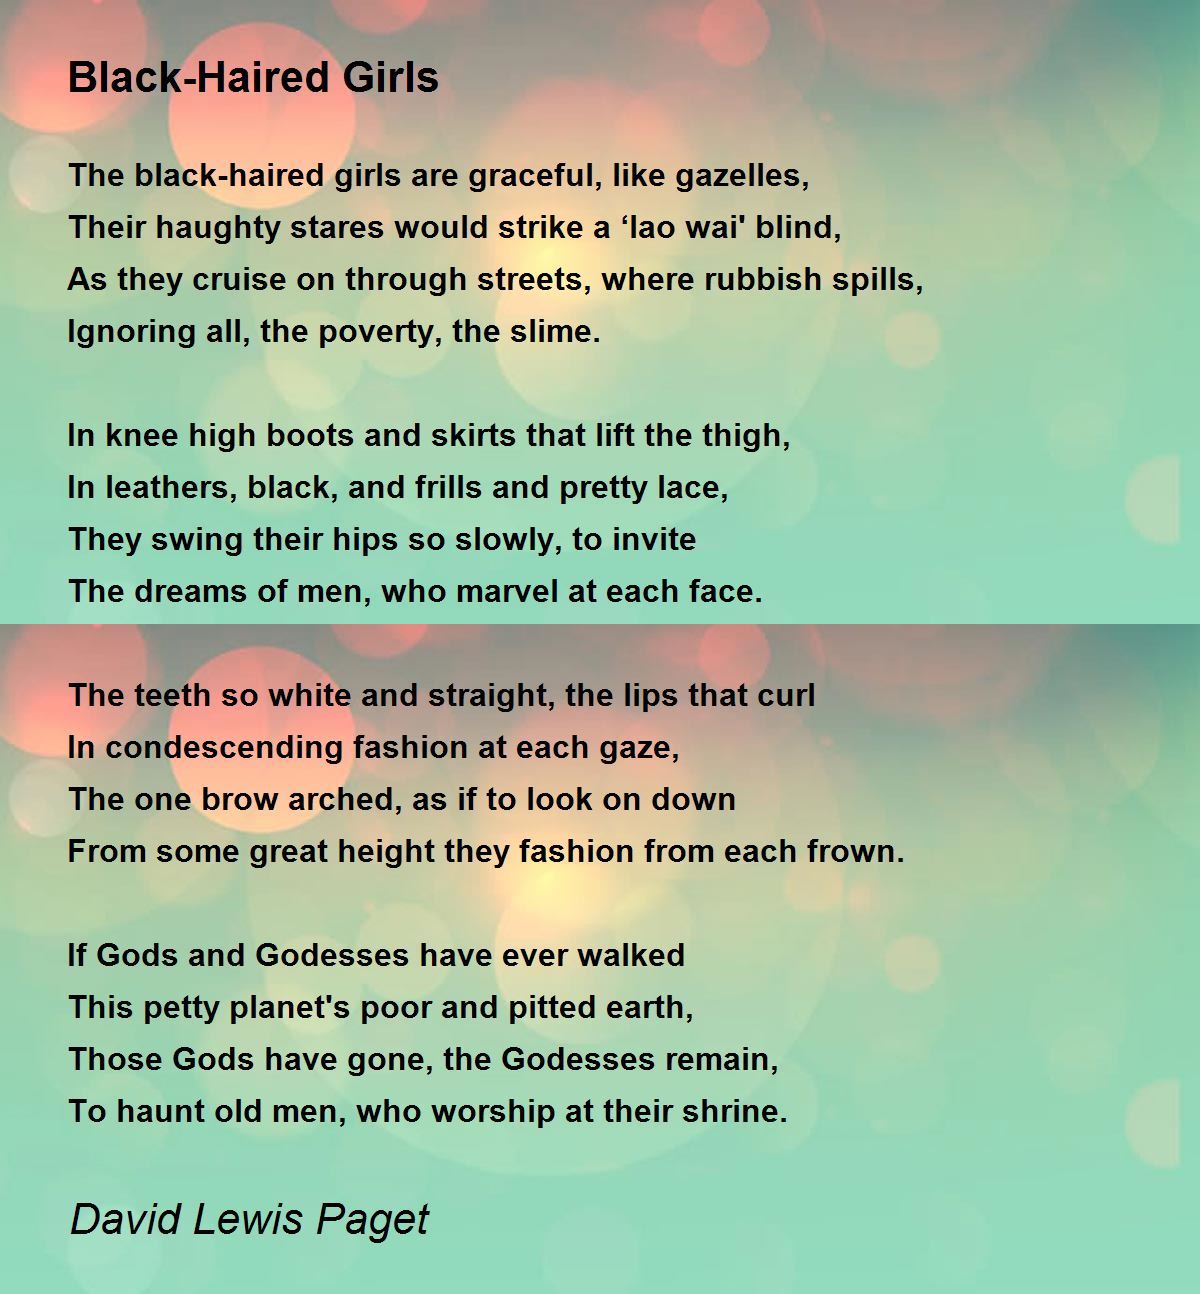 Black-Haired Girls - Black-Haired Girls Poem by David Lewis Paget